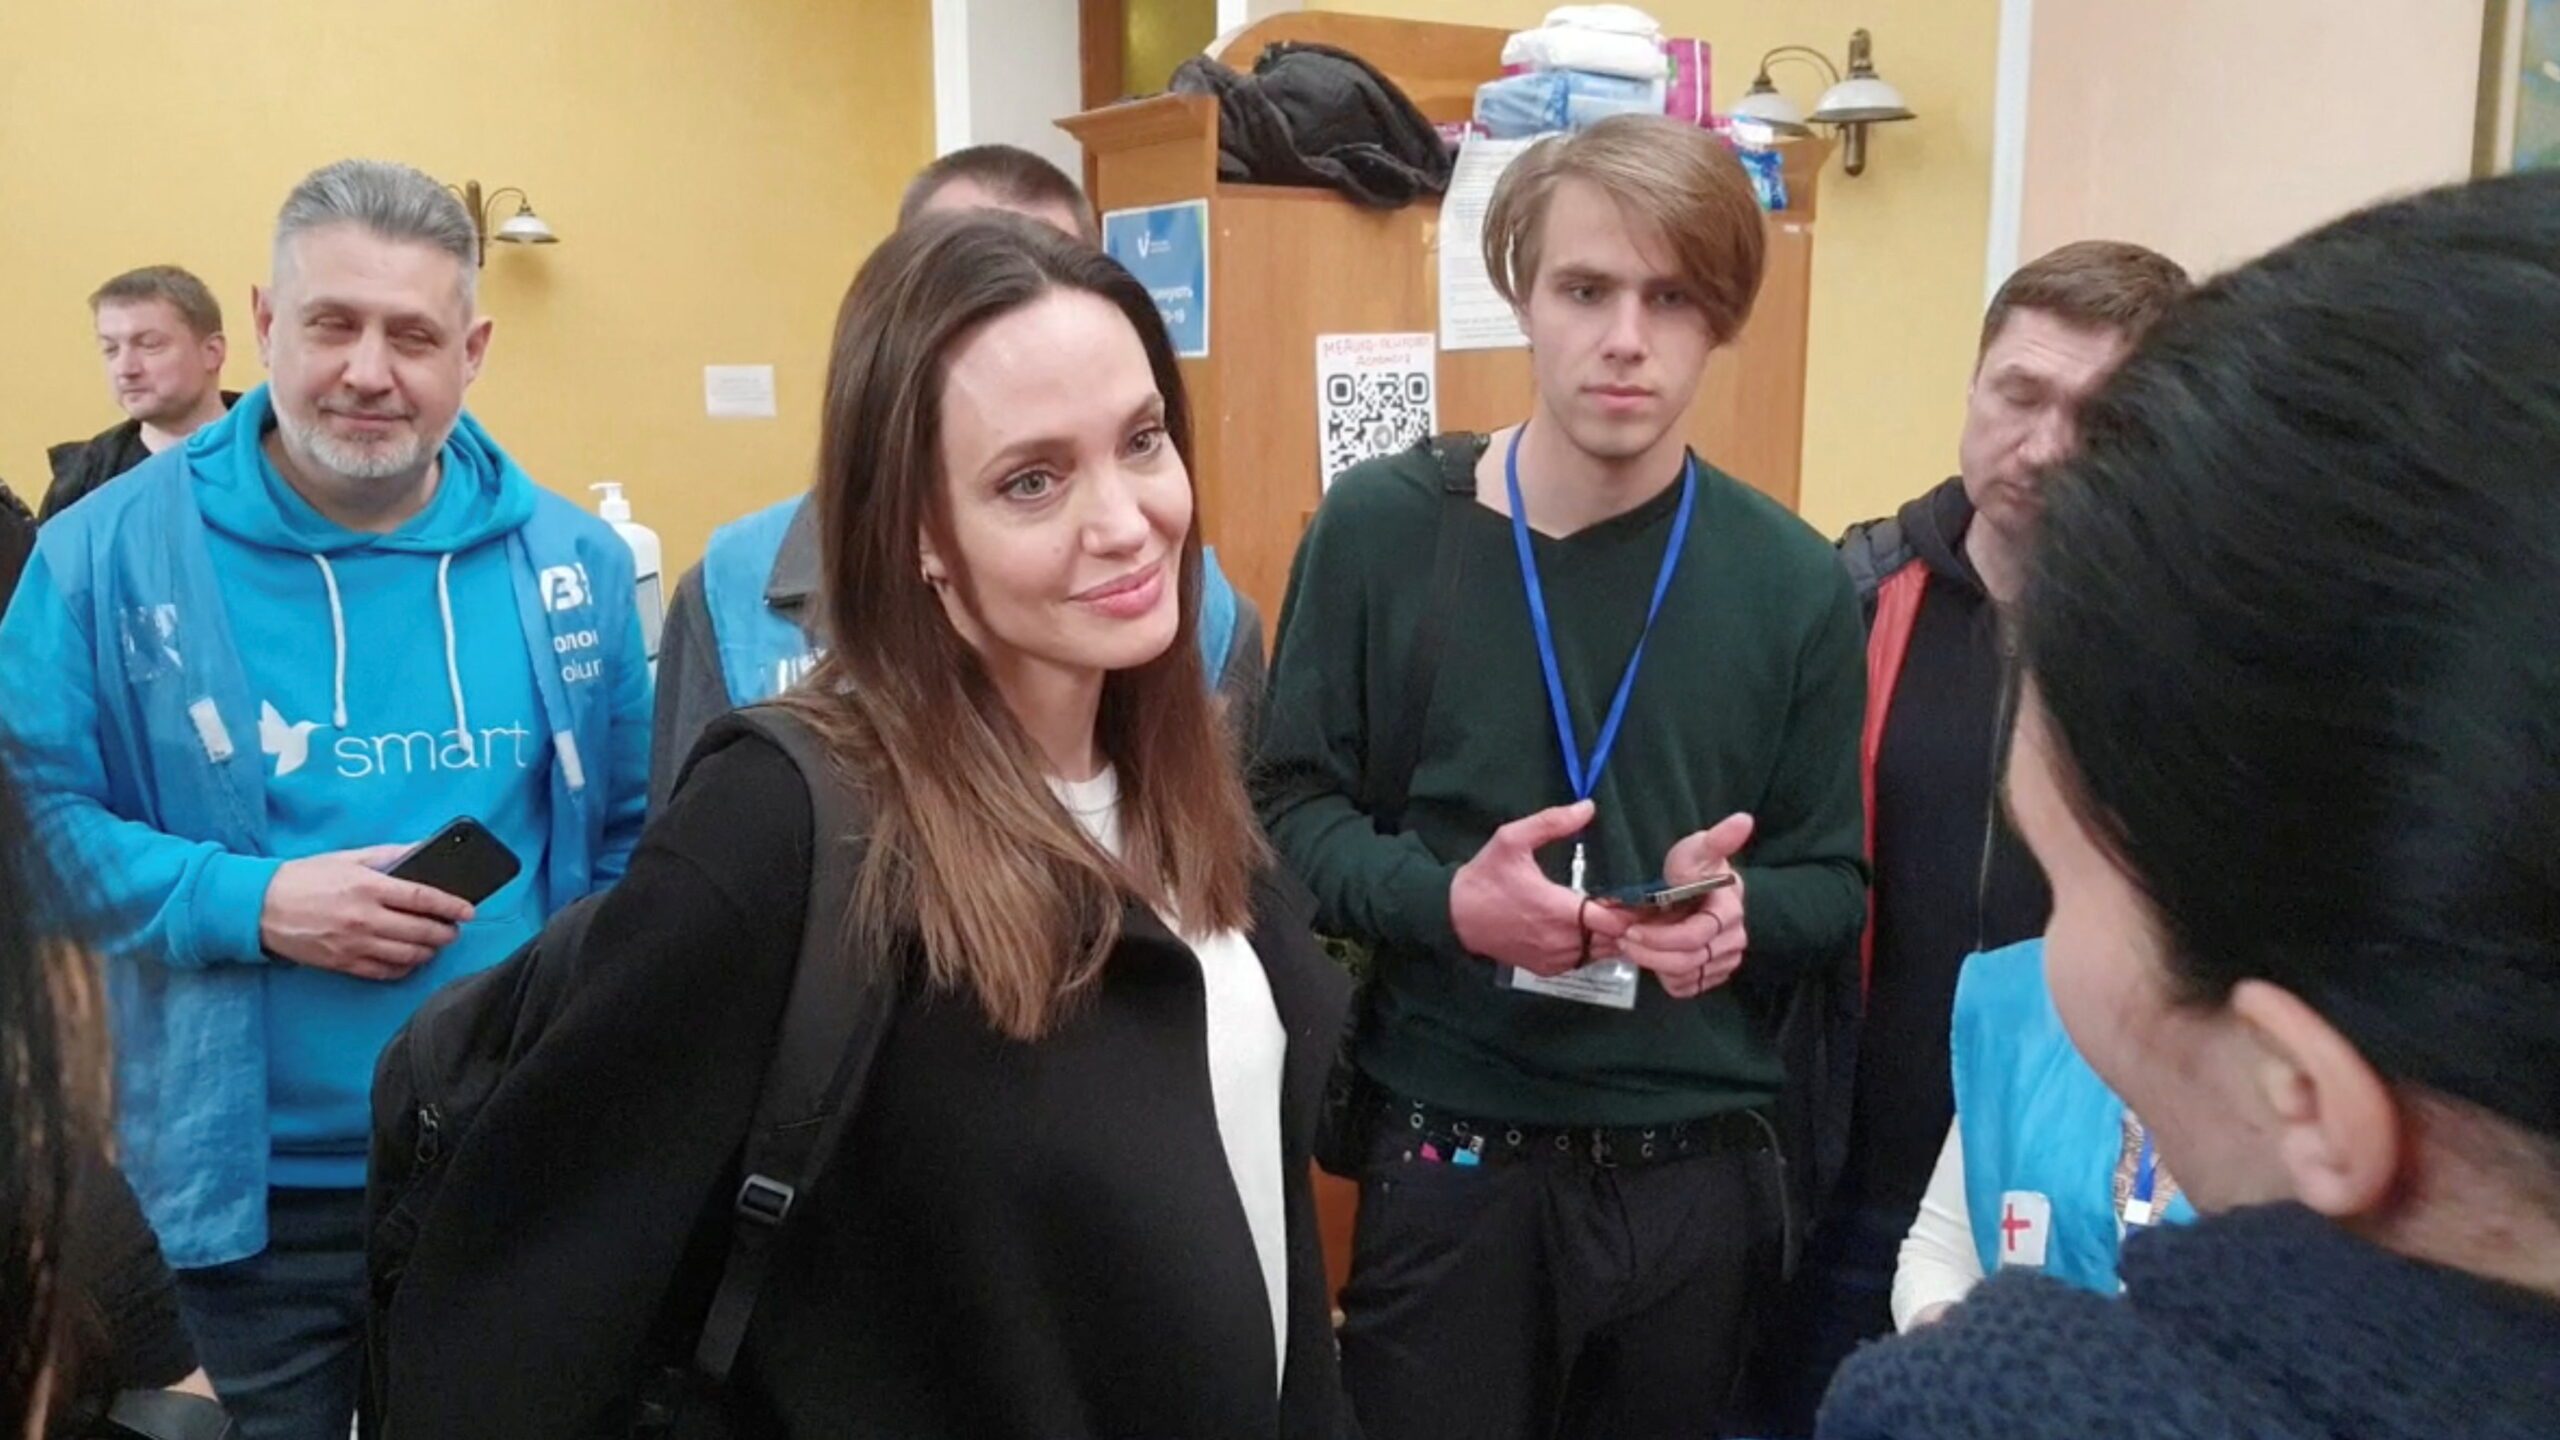 Hollywood actress Angelina Jolie visits Lviv, trip interrupted by sirens